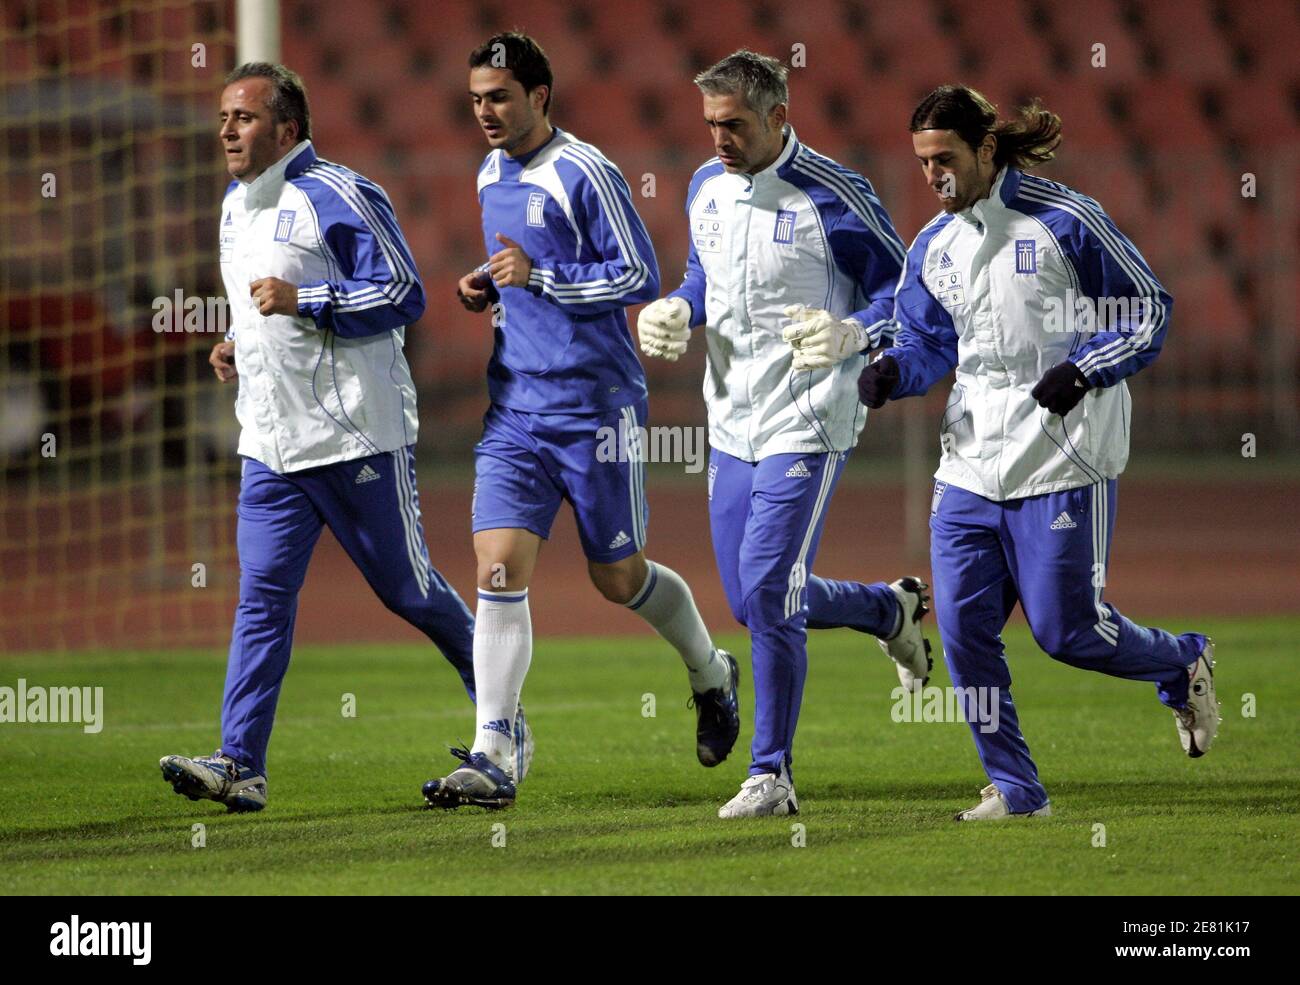 L-R) Topalidis Nikos, assistant coach Loukas Vyntra, Antonis Nikopolidis  and Ioannis Amanatidis run during the training session a day before their  Euro 2008 Group C qualifying soccer match against Hungary in Budapest,